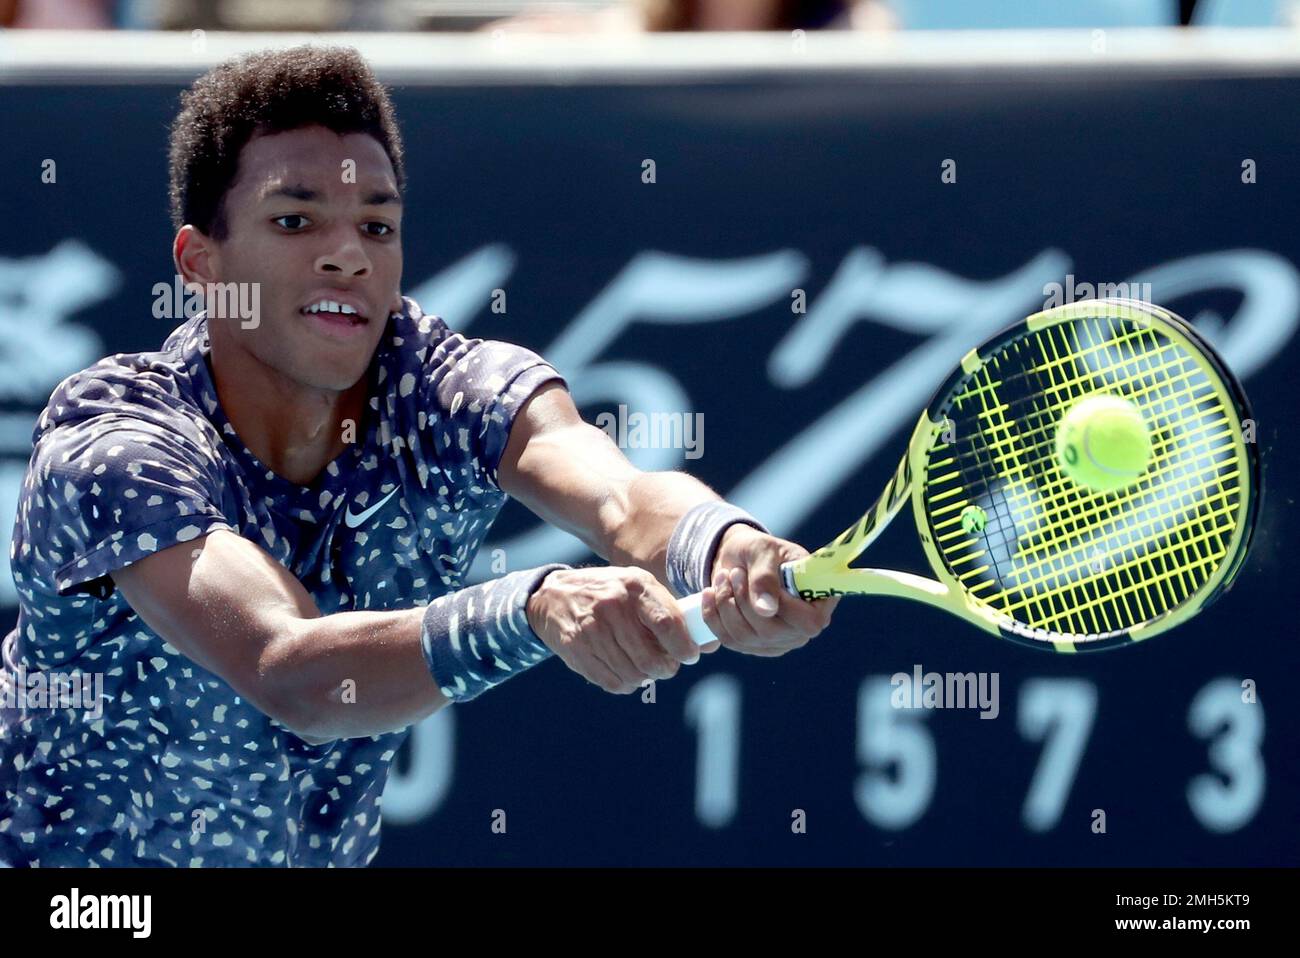 Canada's Felix Auger-Aliassime makes a forehand return to Latvia's Ernests  Gulbis during their first round singles match at the Australian Open tennis  championship in Melbourne, Australia, Tuesday, Jan. 21, 2020. (AP Photo/Dita